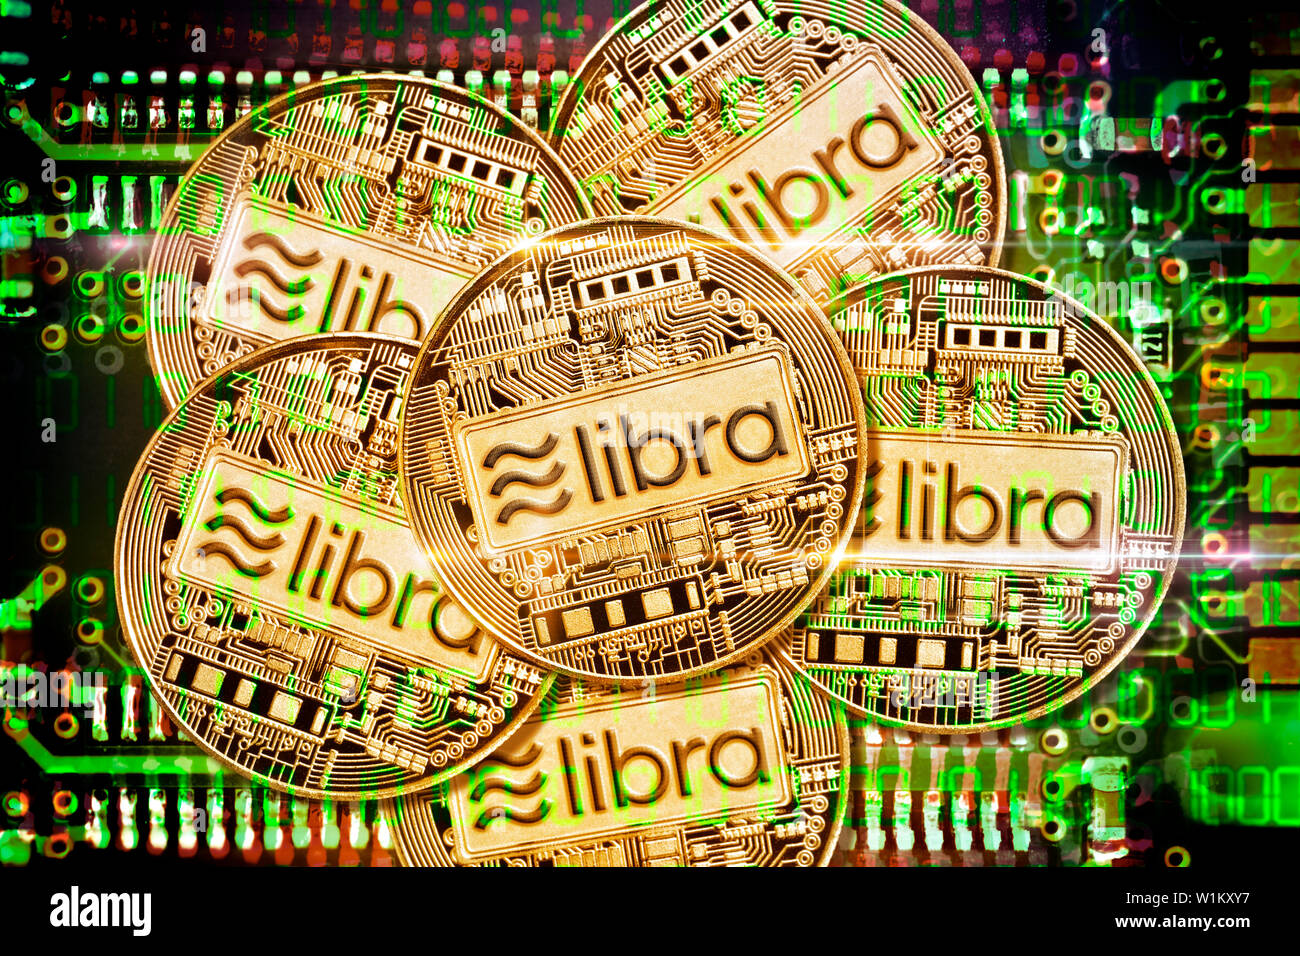 Libra cryptocurrency coins on computer circuit board Stock Photo